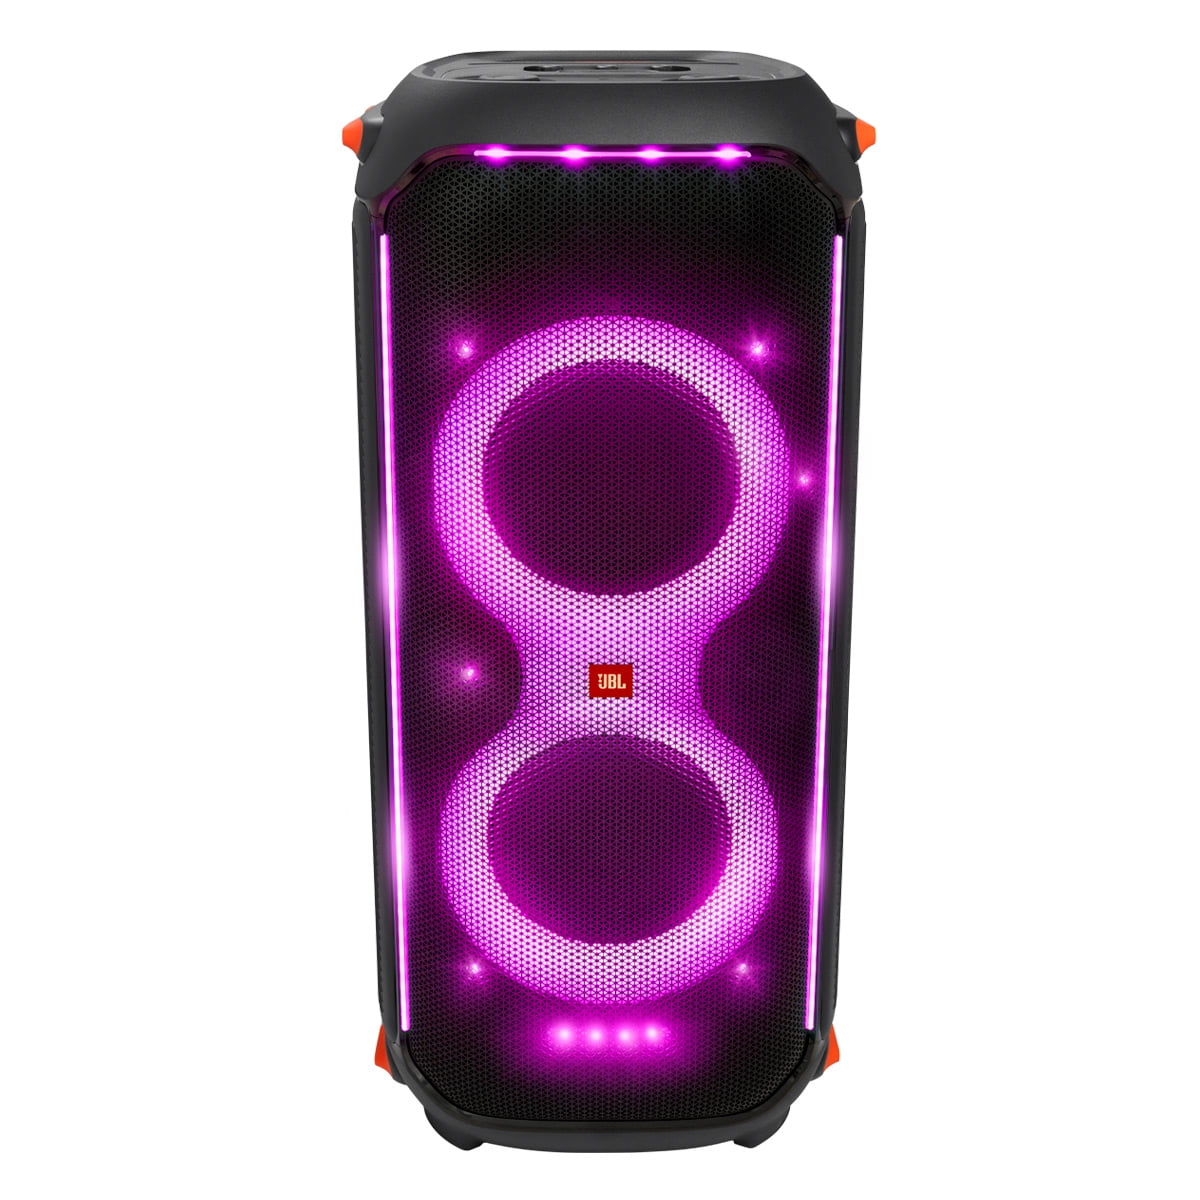 Light Portable Speaker Bluetooth Party PartyBox JBL Design Built-in with and Splashproof 710